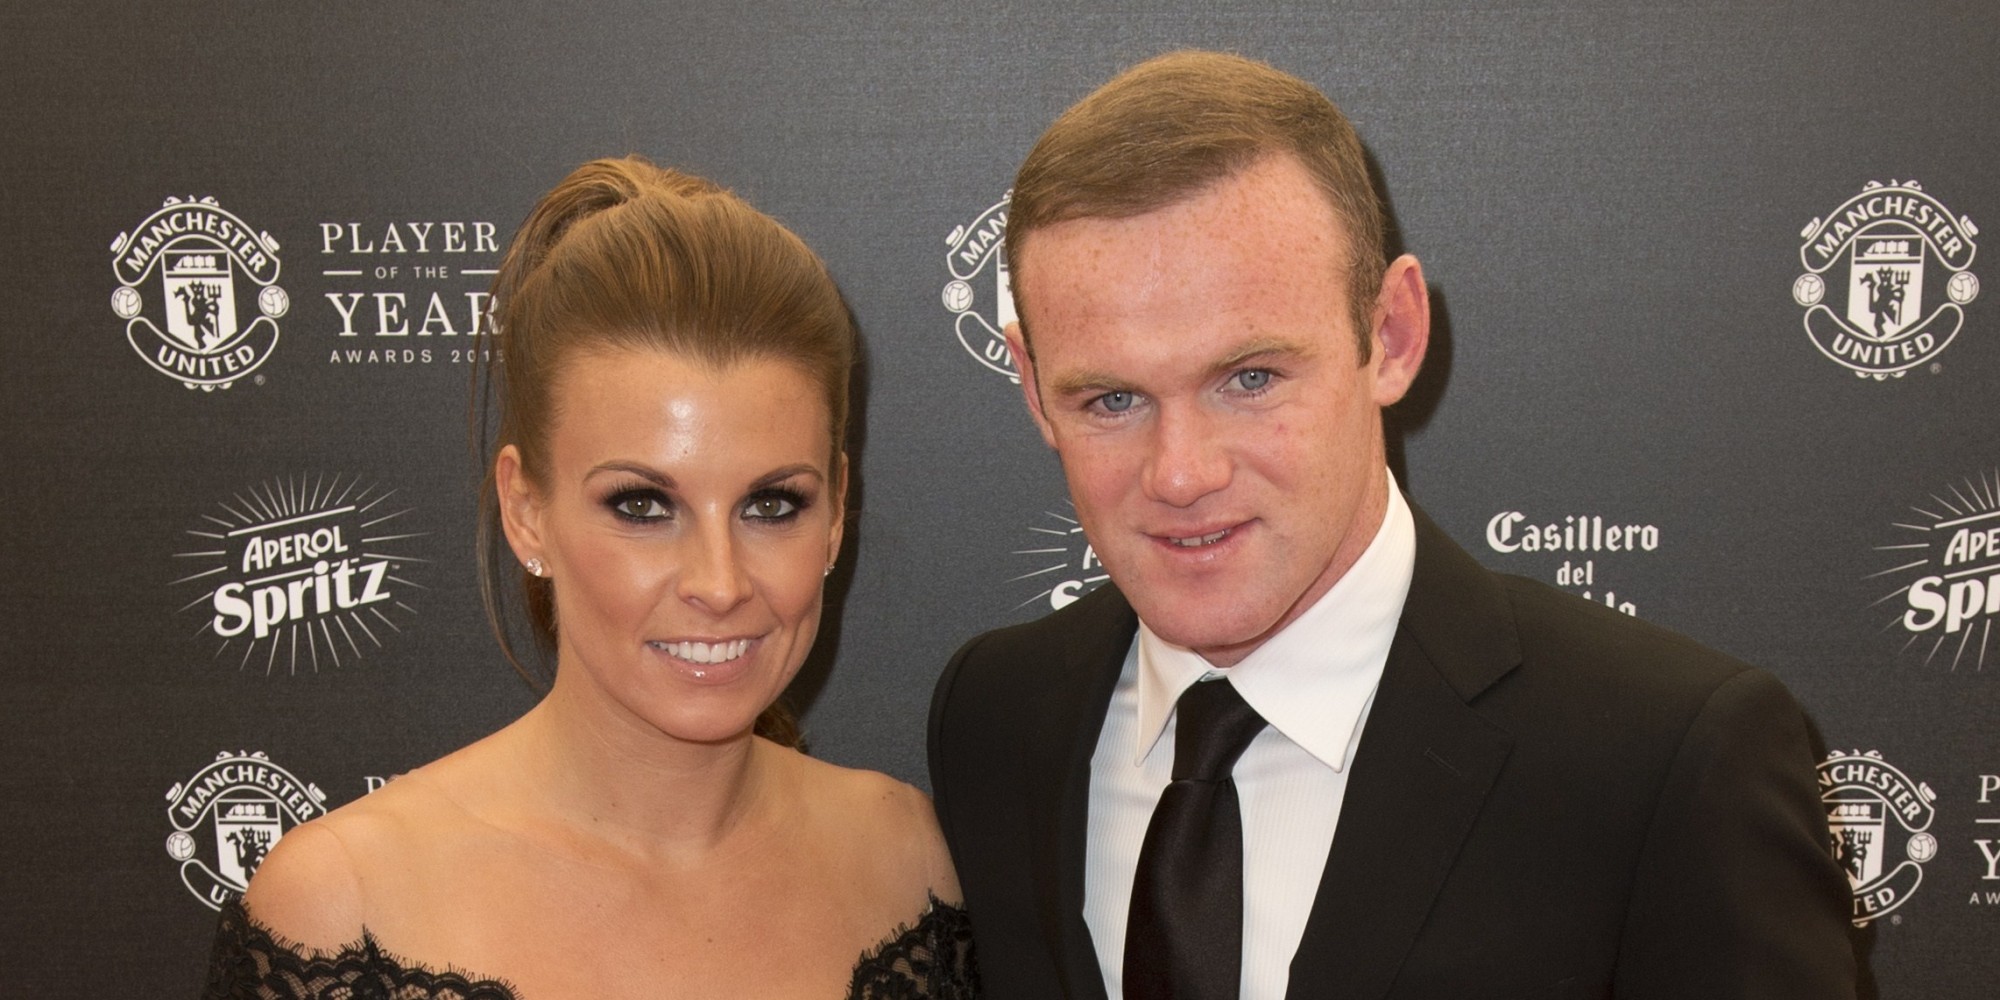 Coleen Rooney Pregnant: Wayne Rooney's Wife Reveals She's Expecting Her